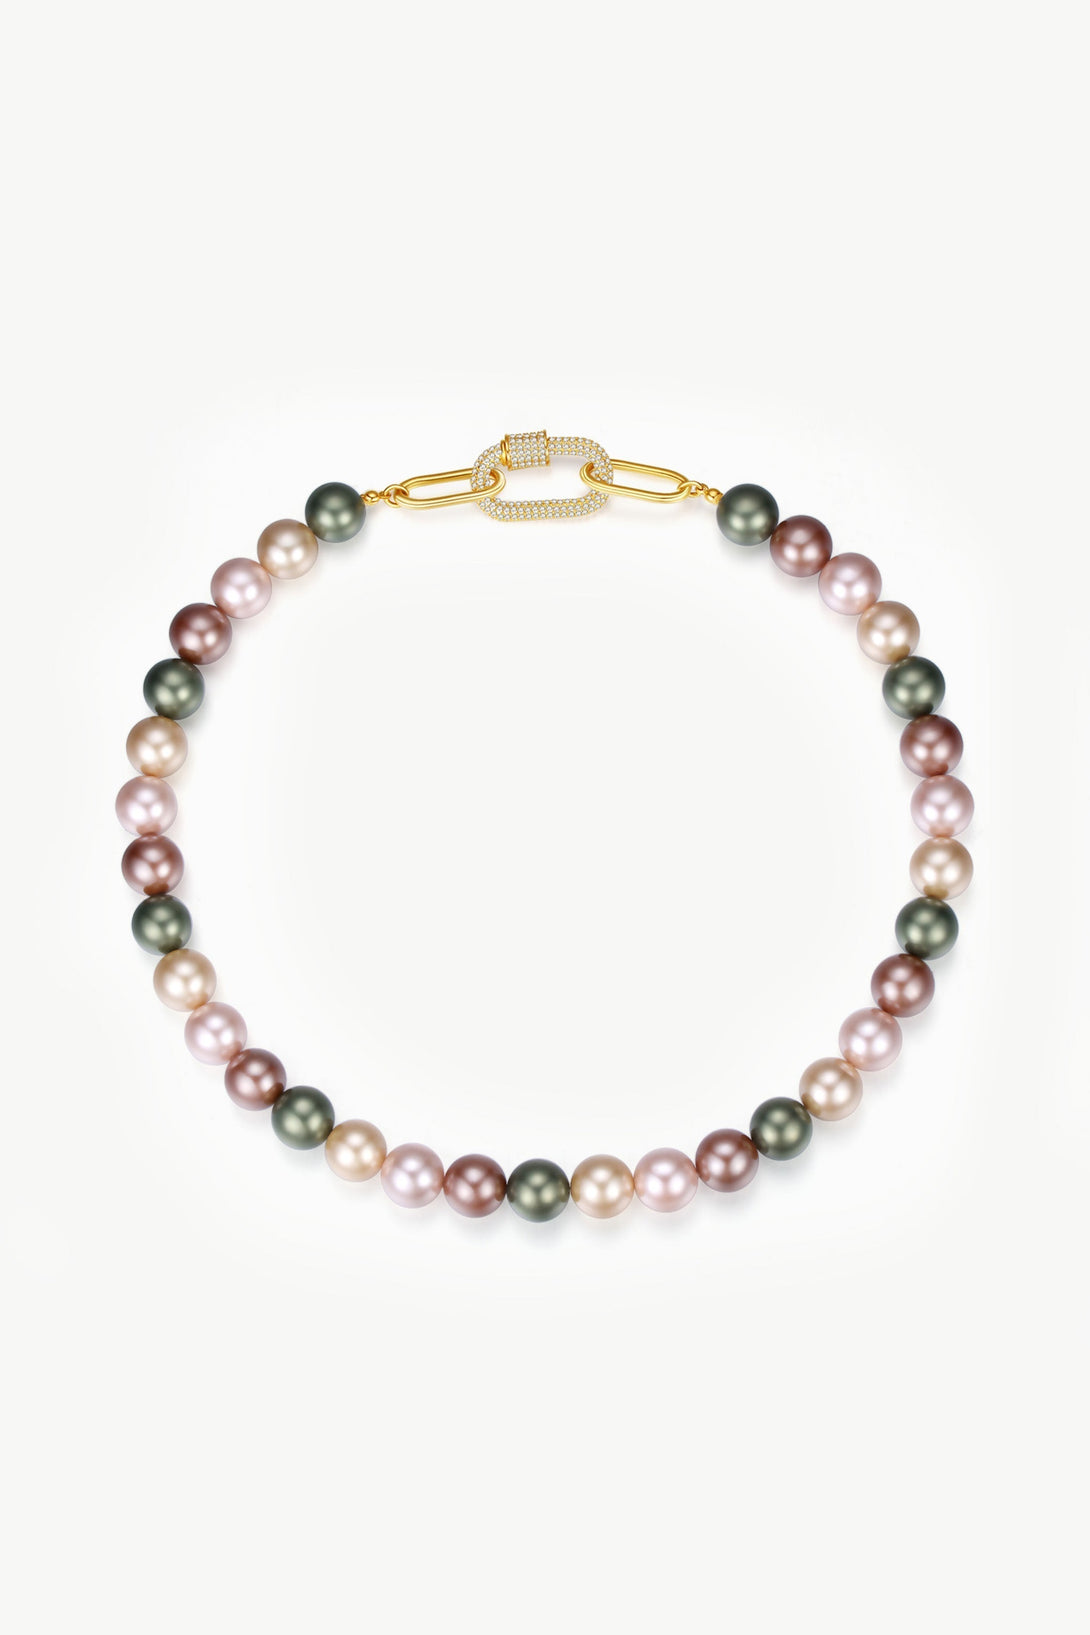 Gold Shell Pearl Necklace with Gem-Encrusted Carabiner Lock (Small) - Classicharms